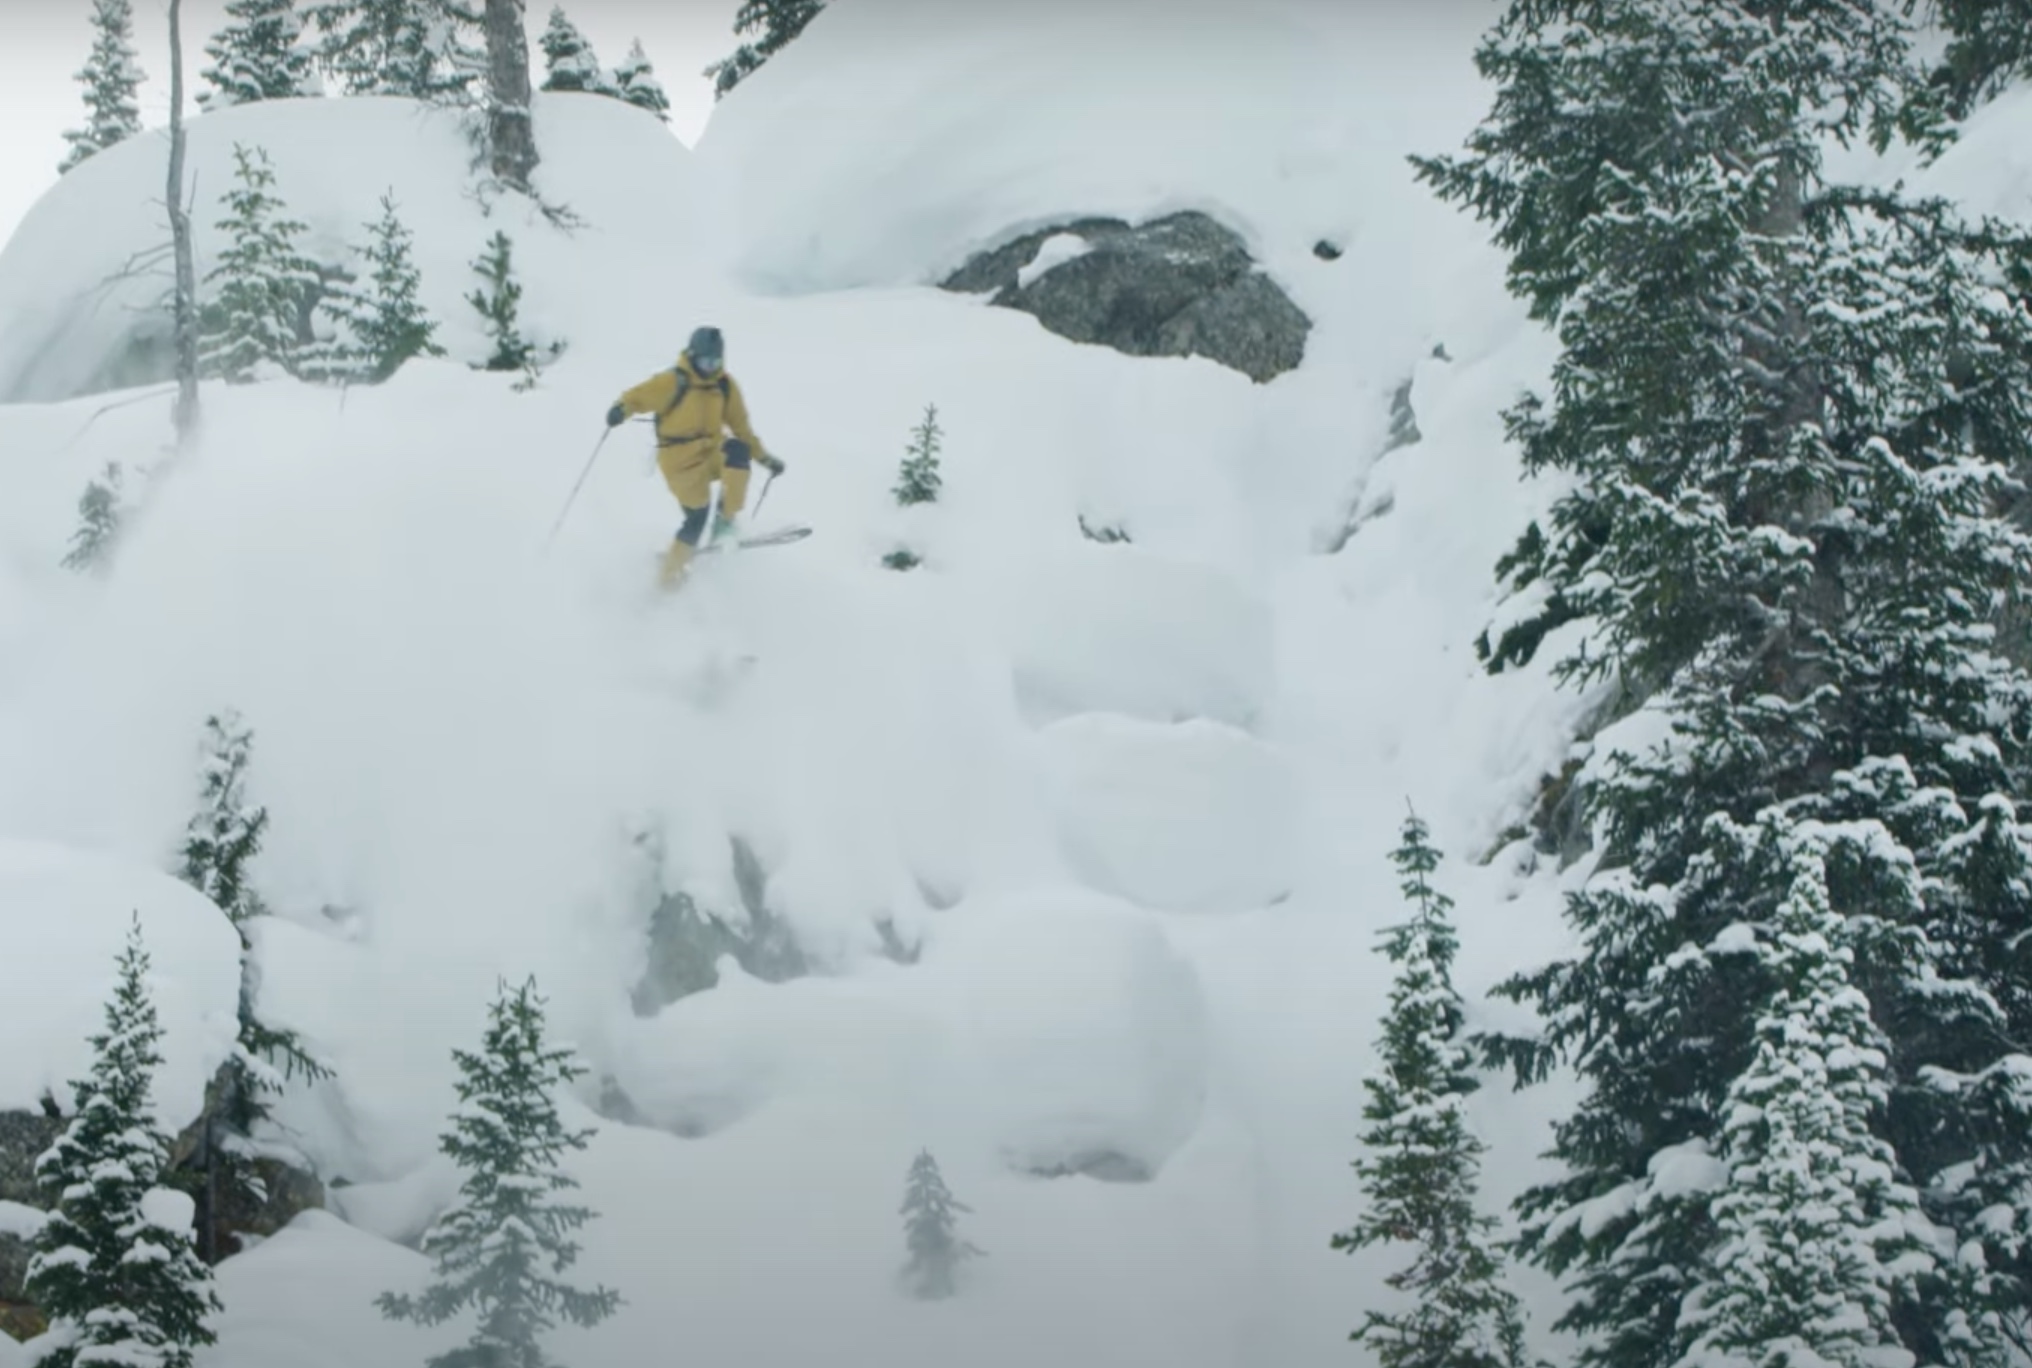 VIDEO: Cooke City, Montana Backcountry Skiing with Parkin Costain